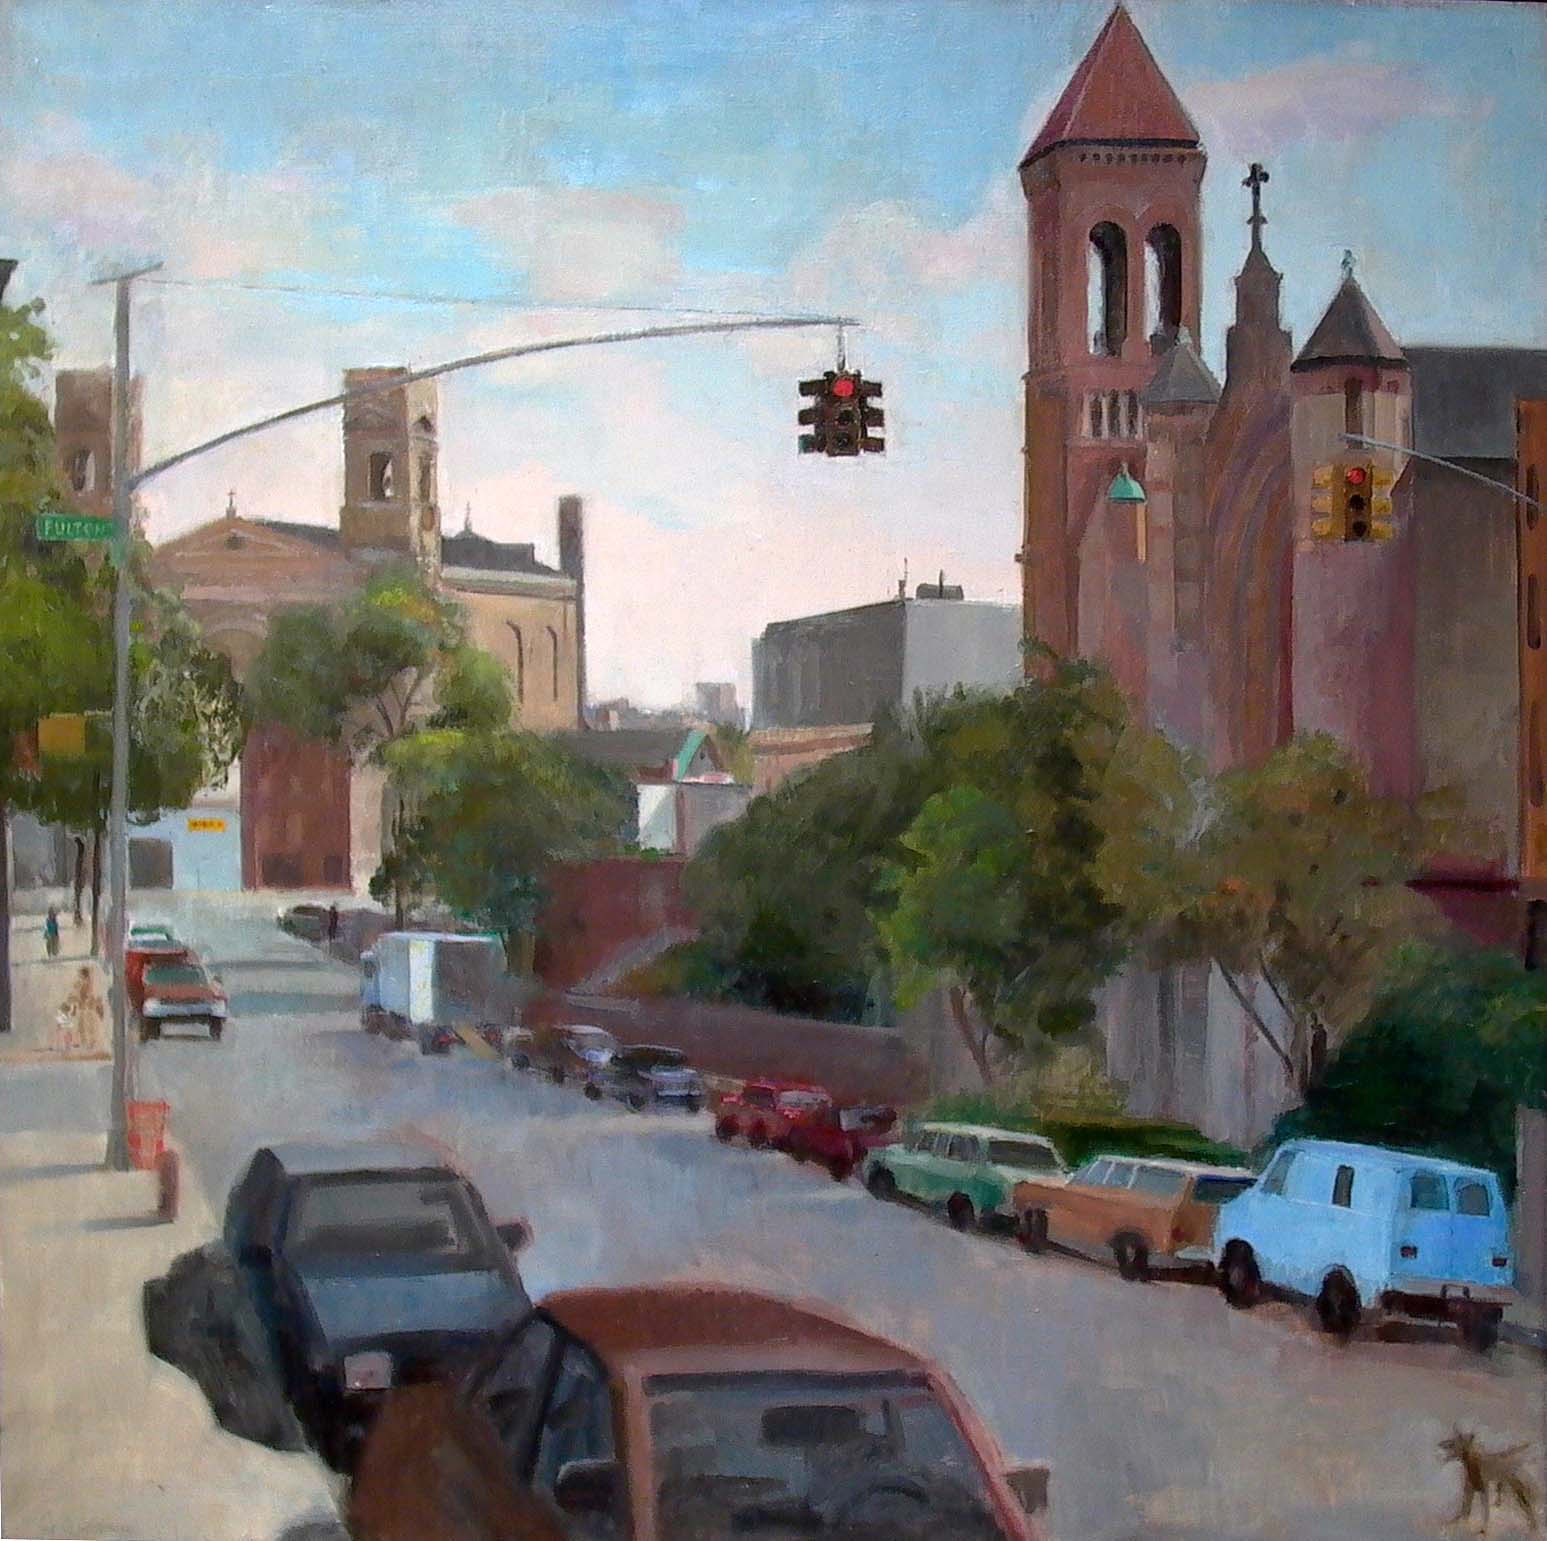 Fulton & Clinton Streets, oil on linen, 37 x 37 inches, 1991.